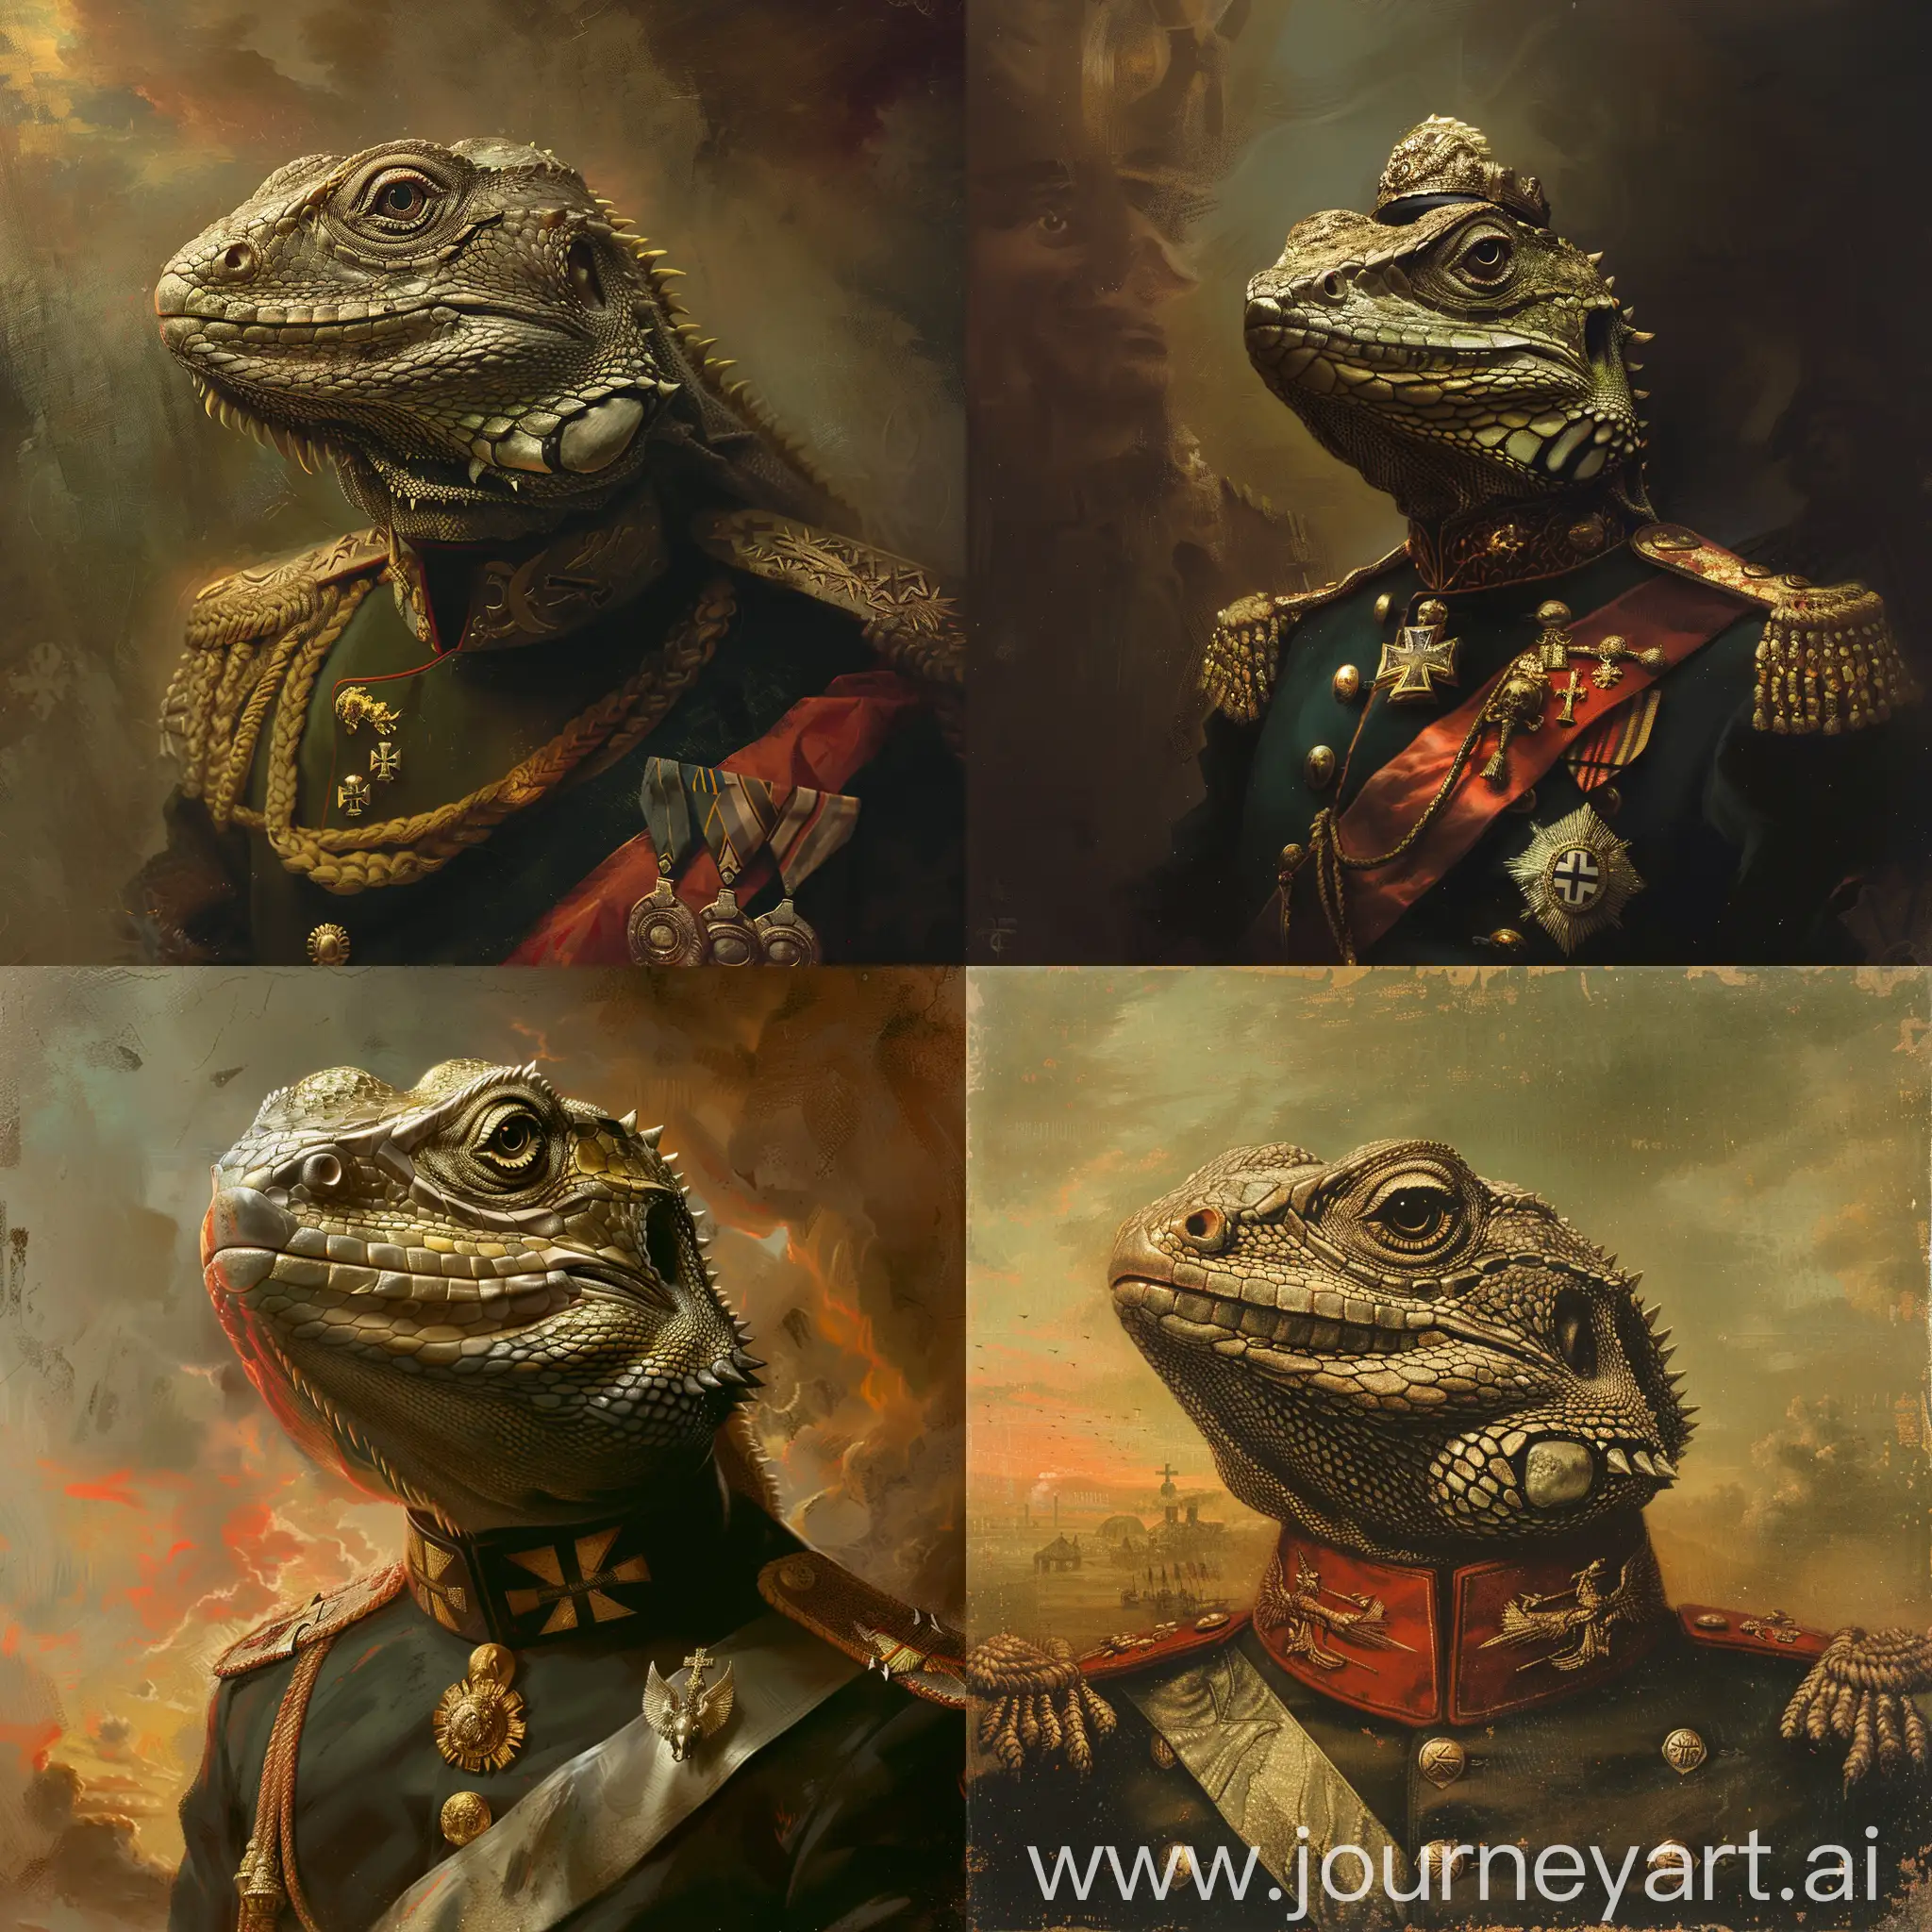 German-Military-Lizard-Emperor-Conquering-the-World